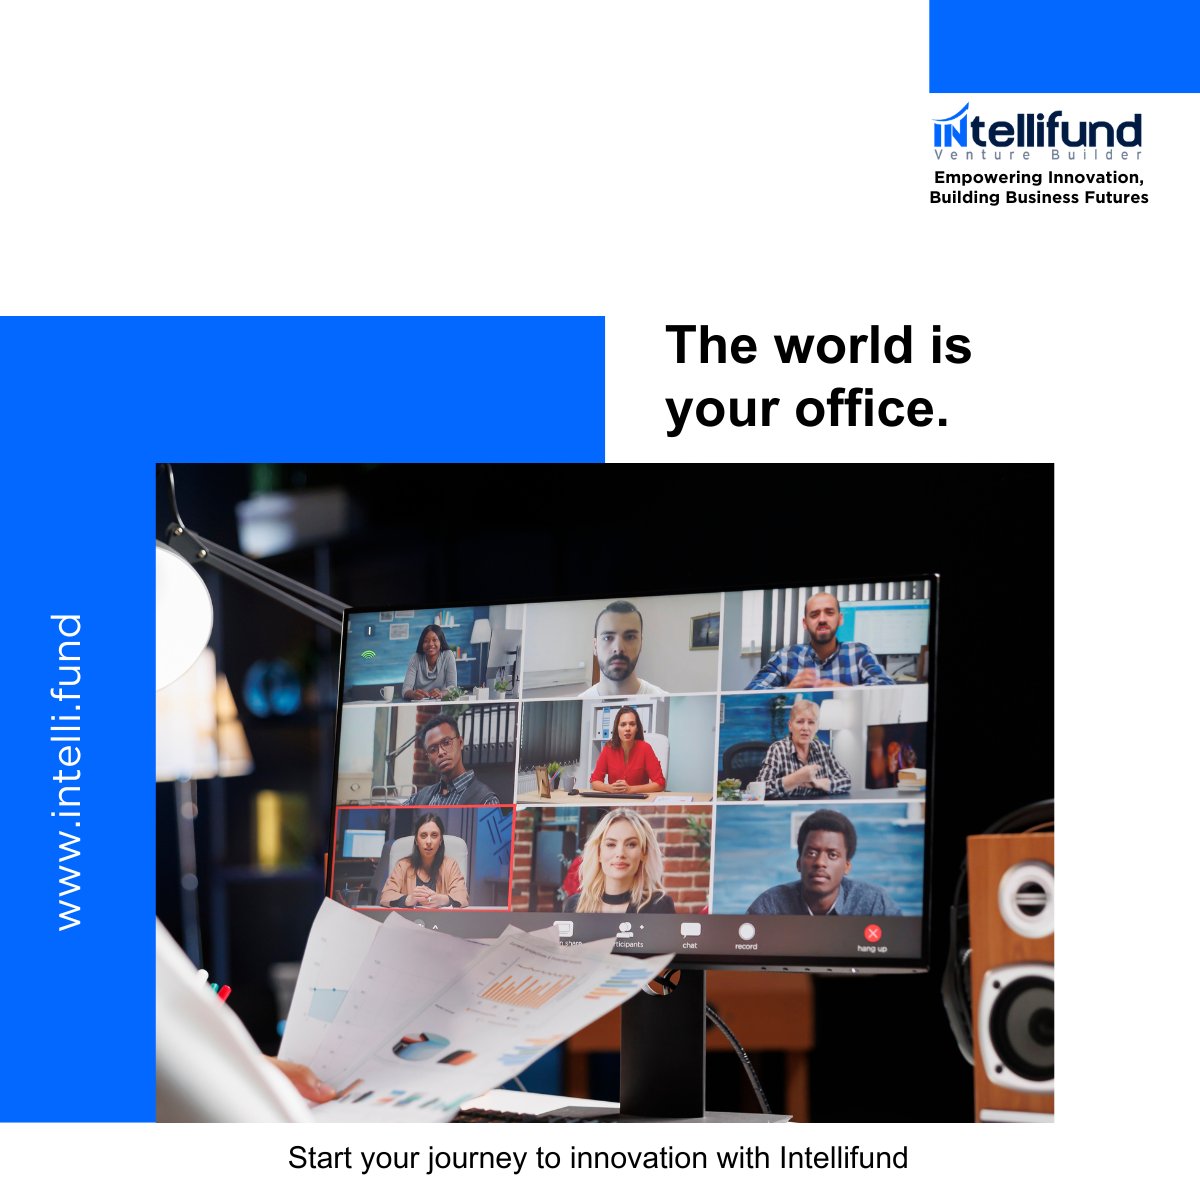 The world is your office, and your guiding stars are creativity and collaboration. Join Intellifund in redefining work. 
.
.
#RemoteWorkRevolution #CreativityCollaboration
#CompetitiveEdge #Intellifund
#Leadership #Innovation#IntellifundInnovates #VentureBuildingExperts